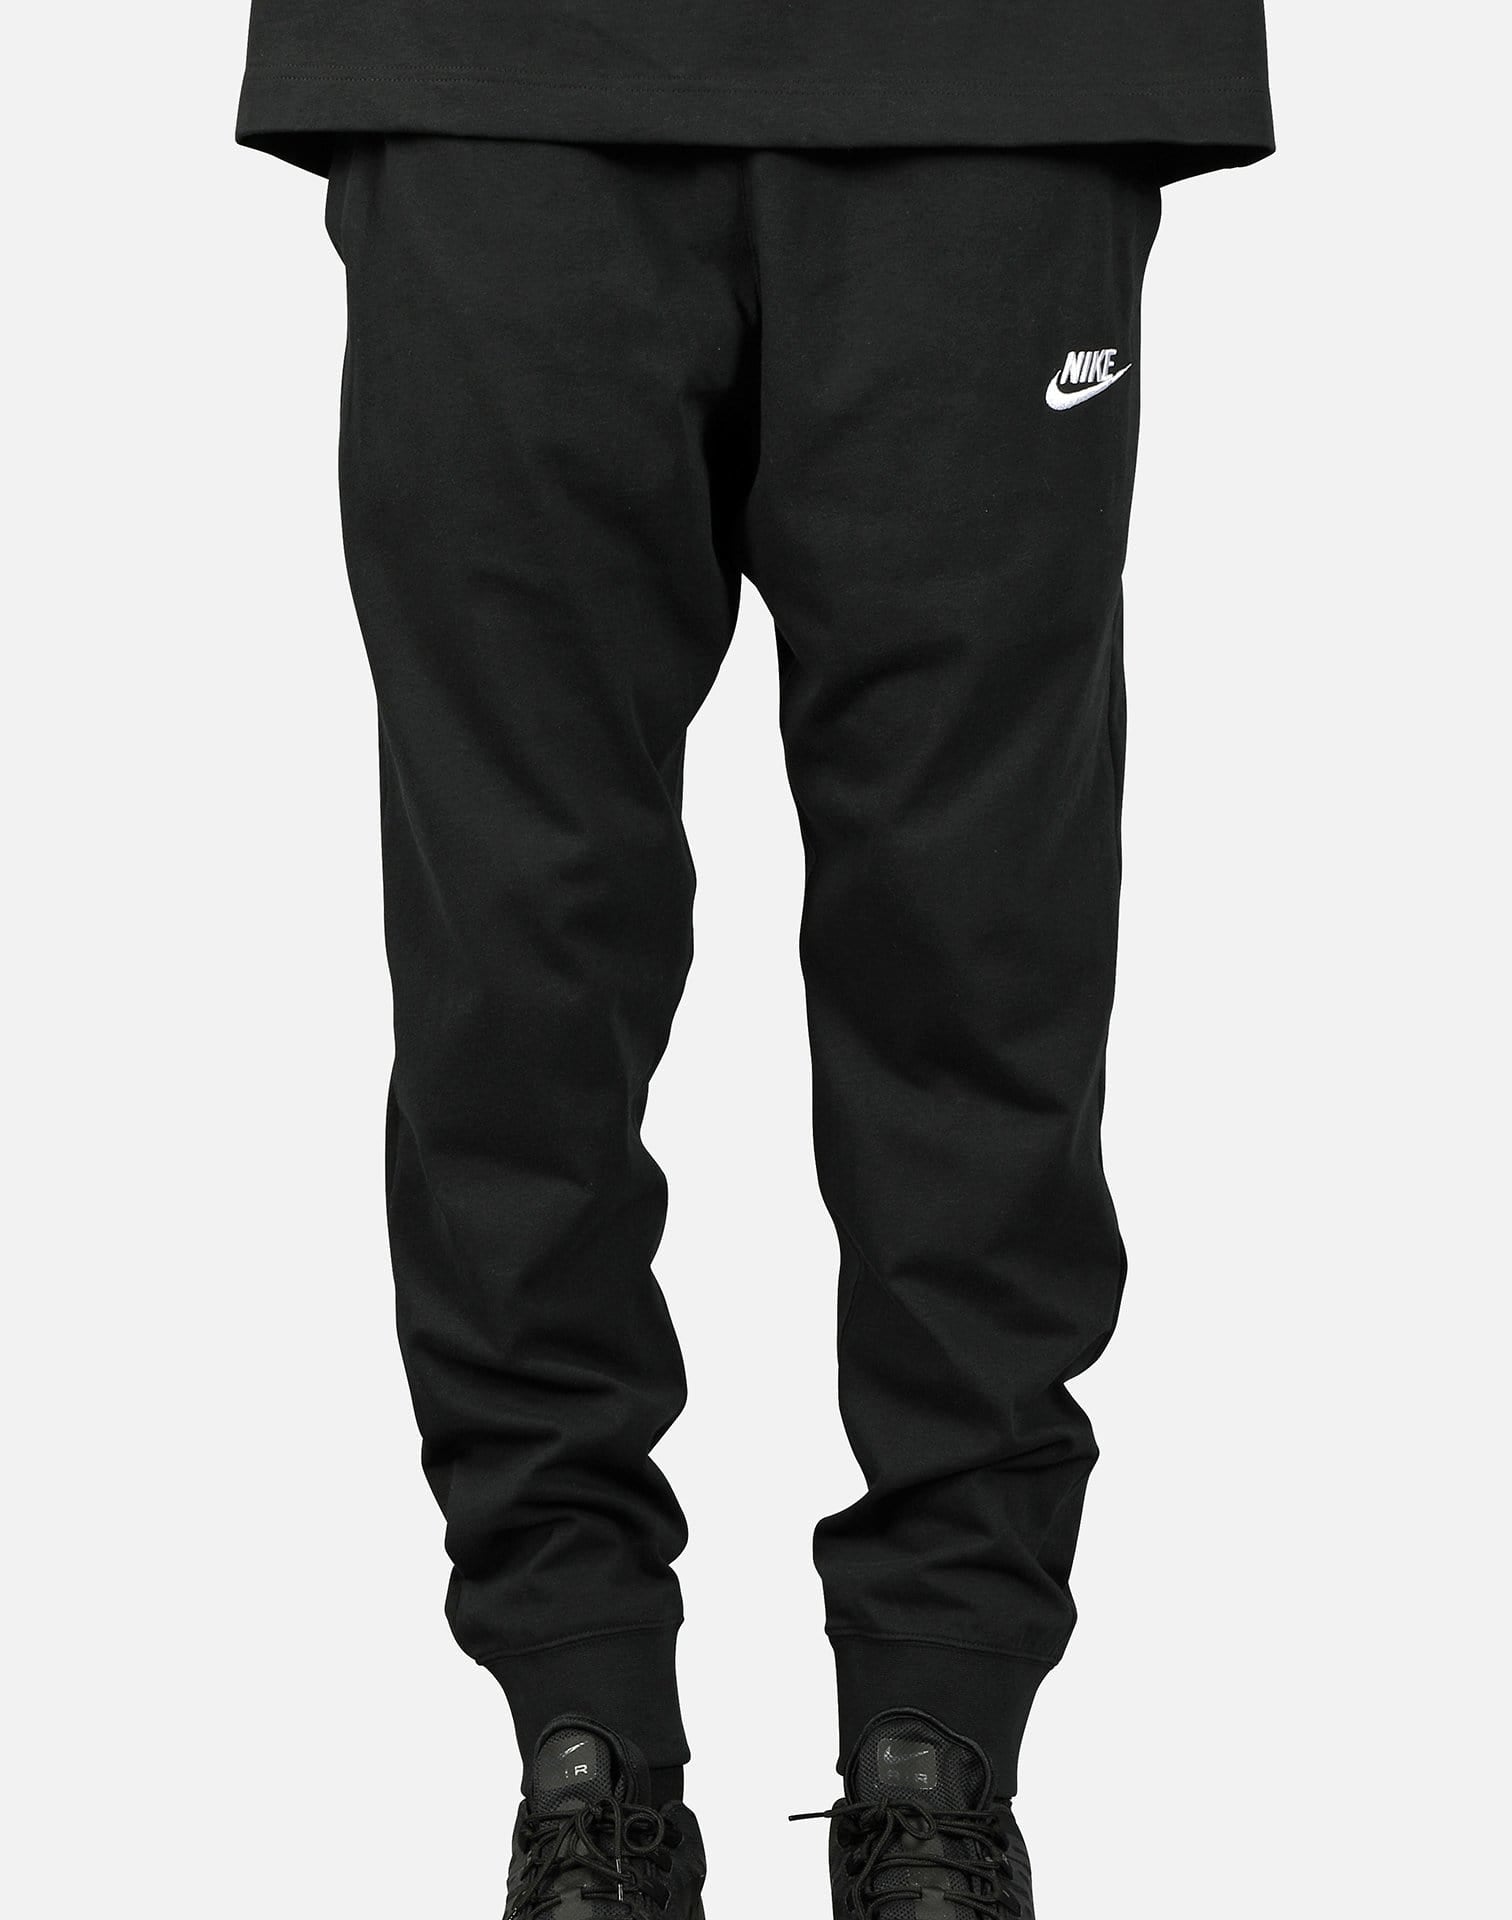 NSW CLUB JOGGER PANTS – DTLR